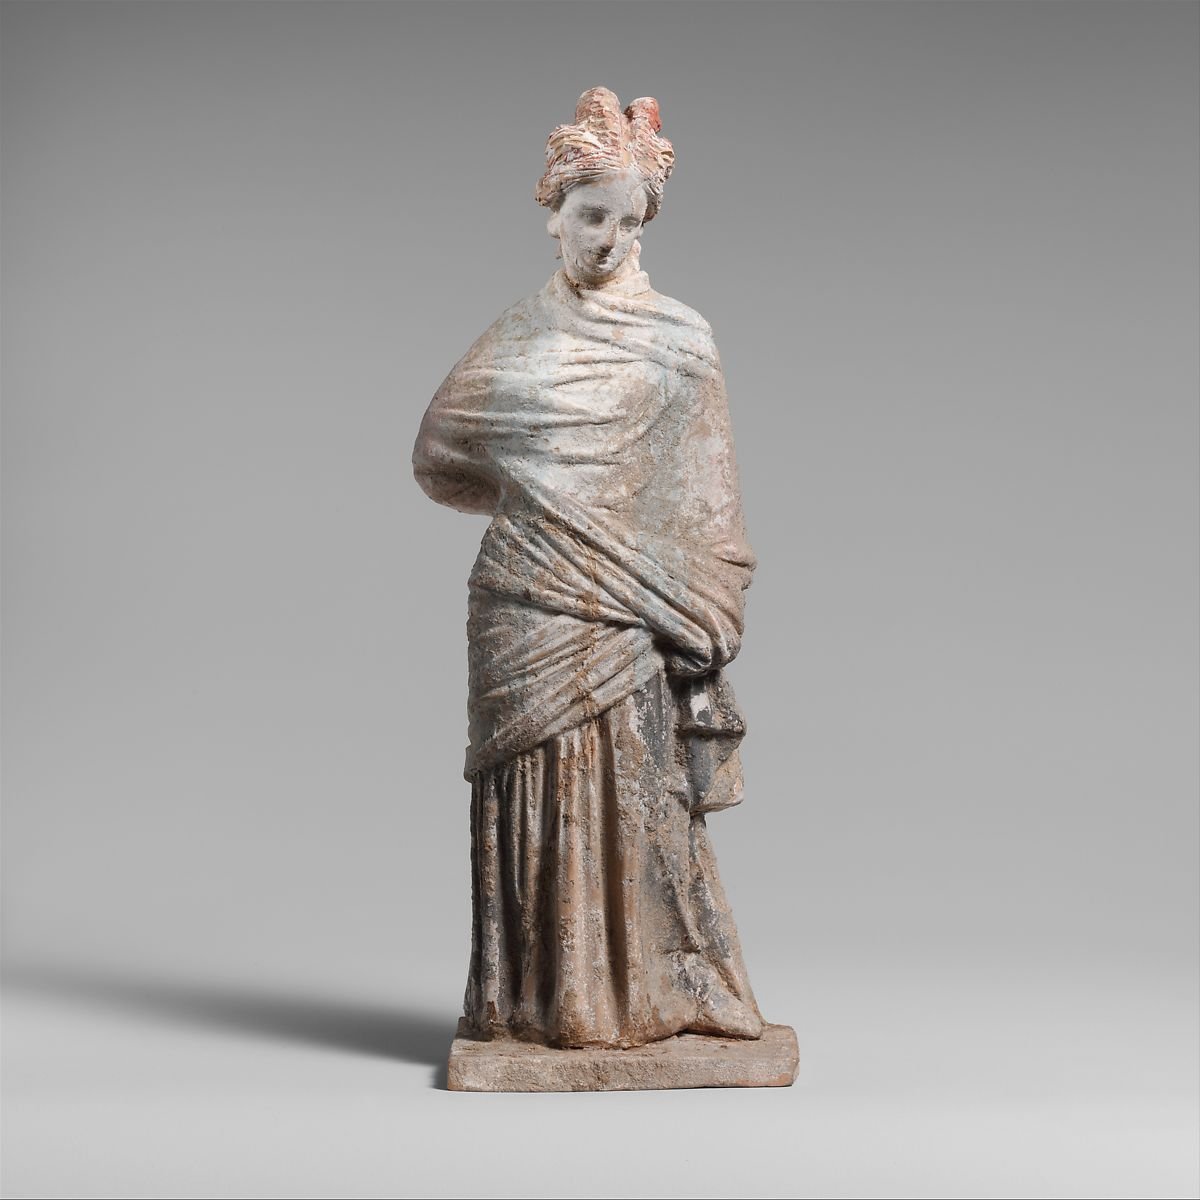 3/nTitle: Terracotta draped womanPeriod: HellenisticDate: 3rd century B.C.Culture: Greek, BoeotianMedium: Terracottaimensions: H. 7 3/4in. (19.6 cm)Accession Number: 07.286.2 #Archaeology